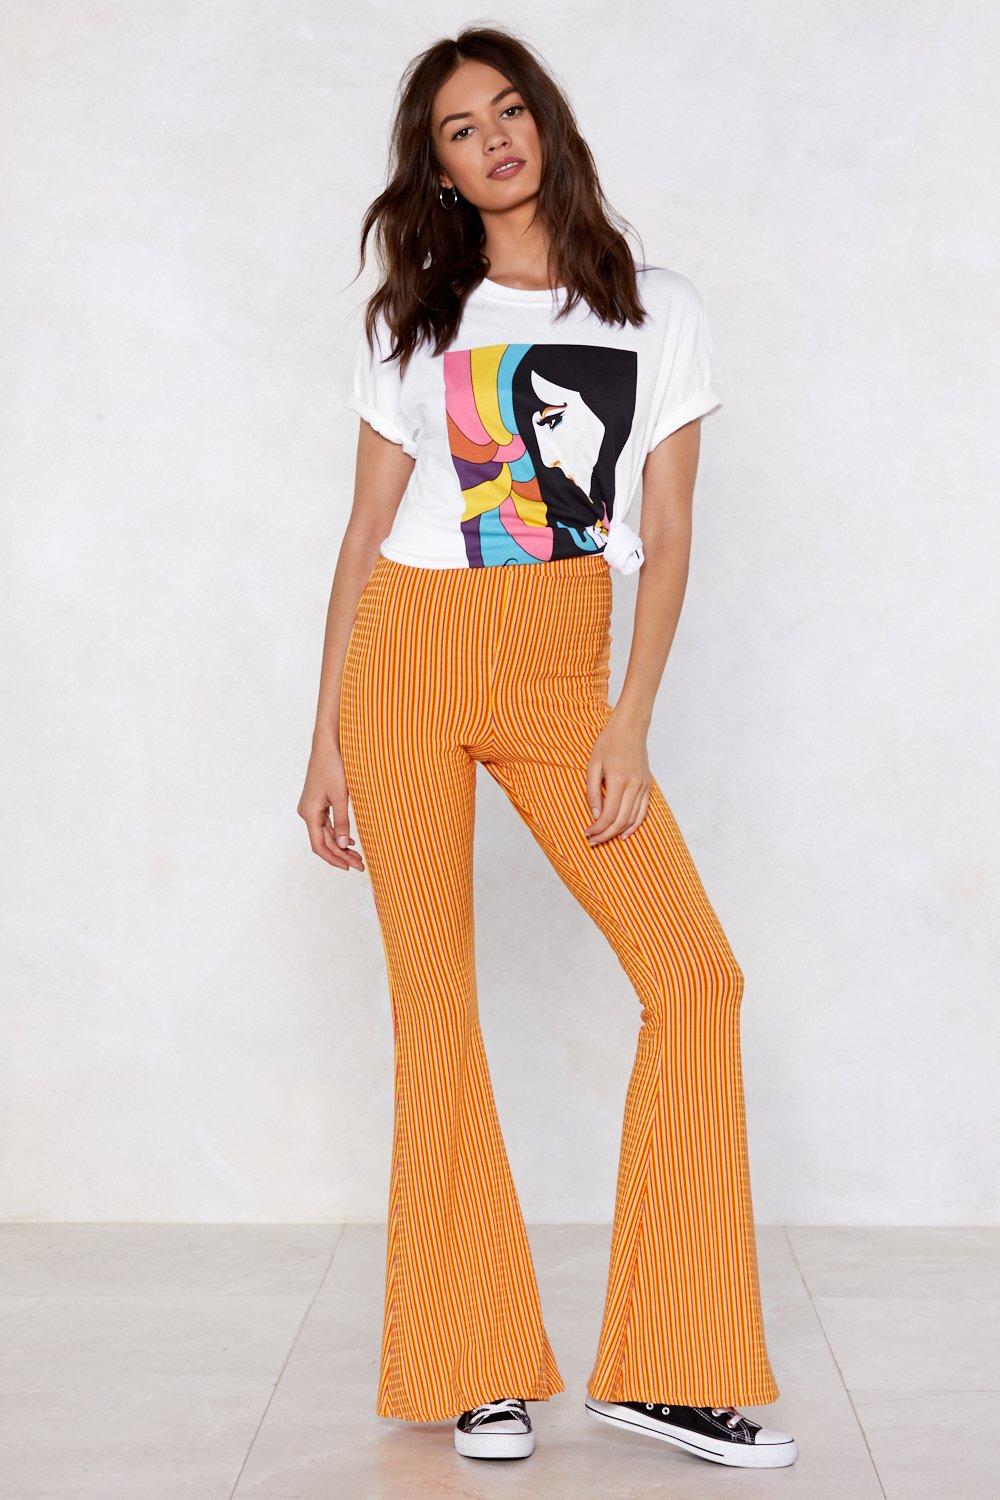 flare striped pants